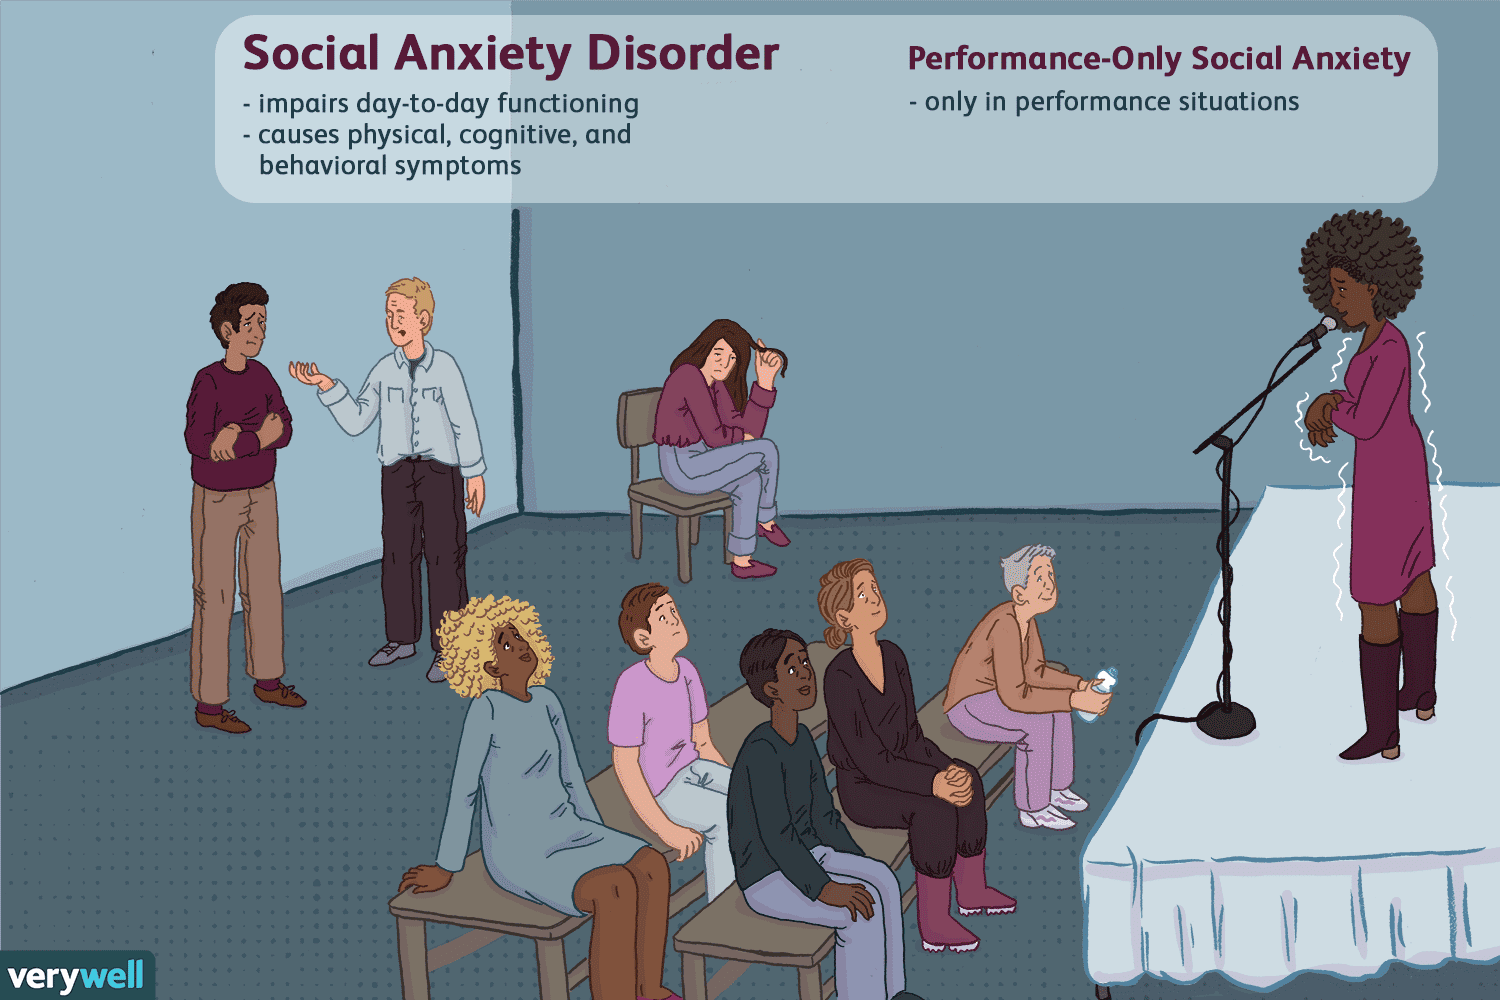 What Is Social Anxiety Disorder?